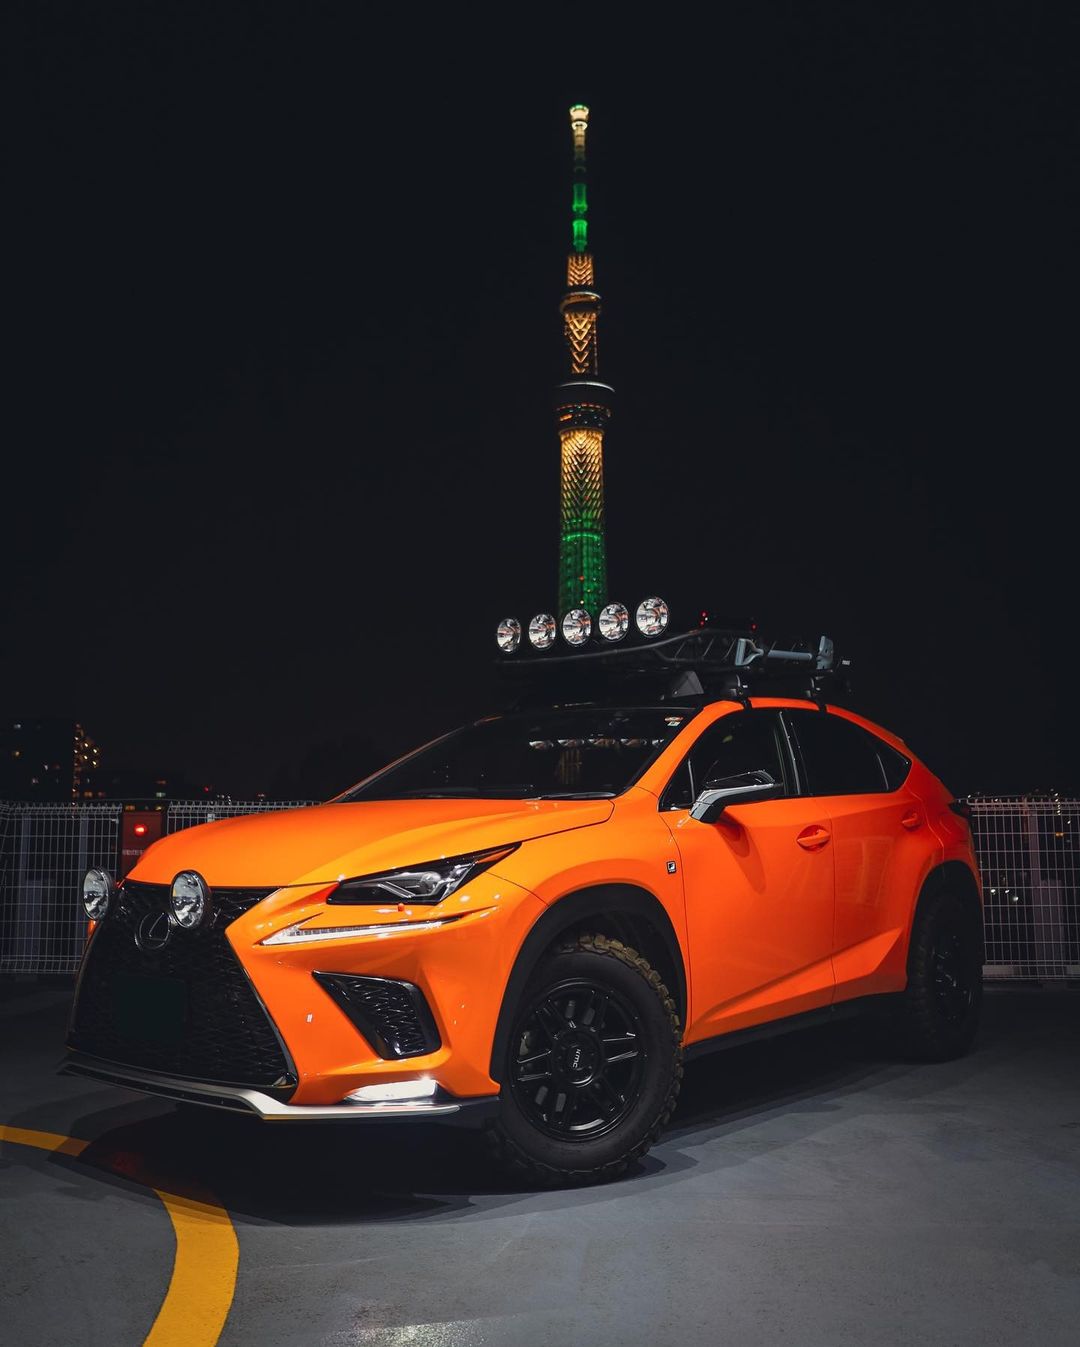 Lexus NX300 F-Sport in orange with a roof rack and LED lights